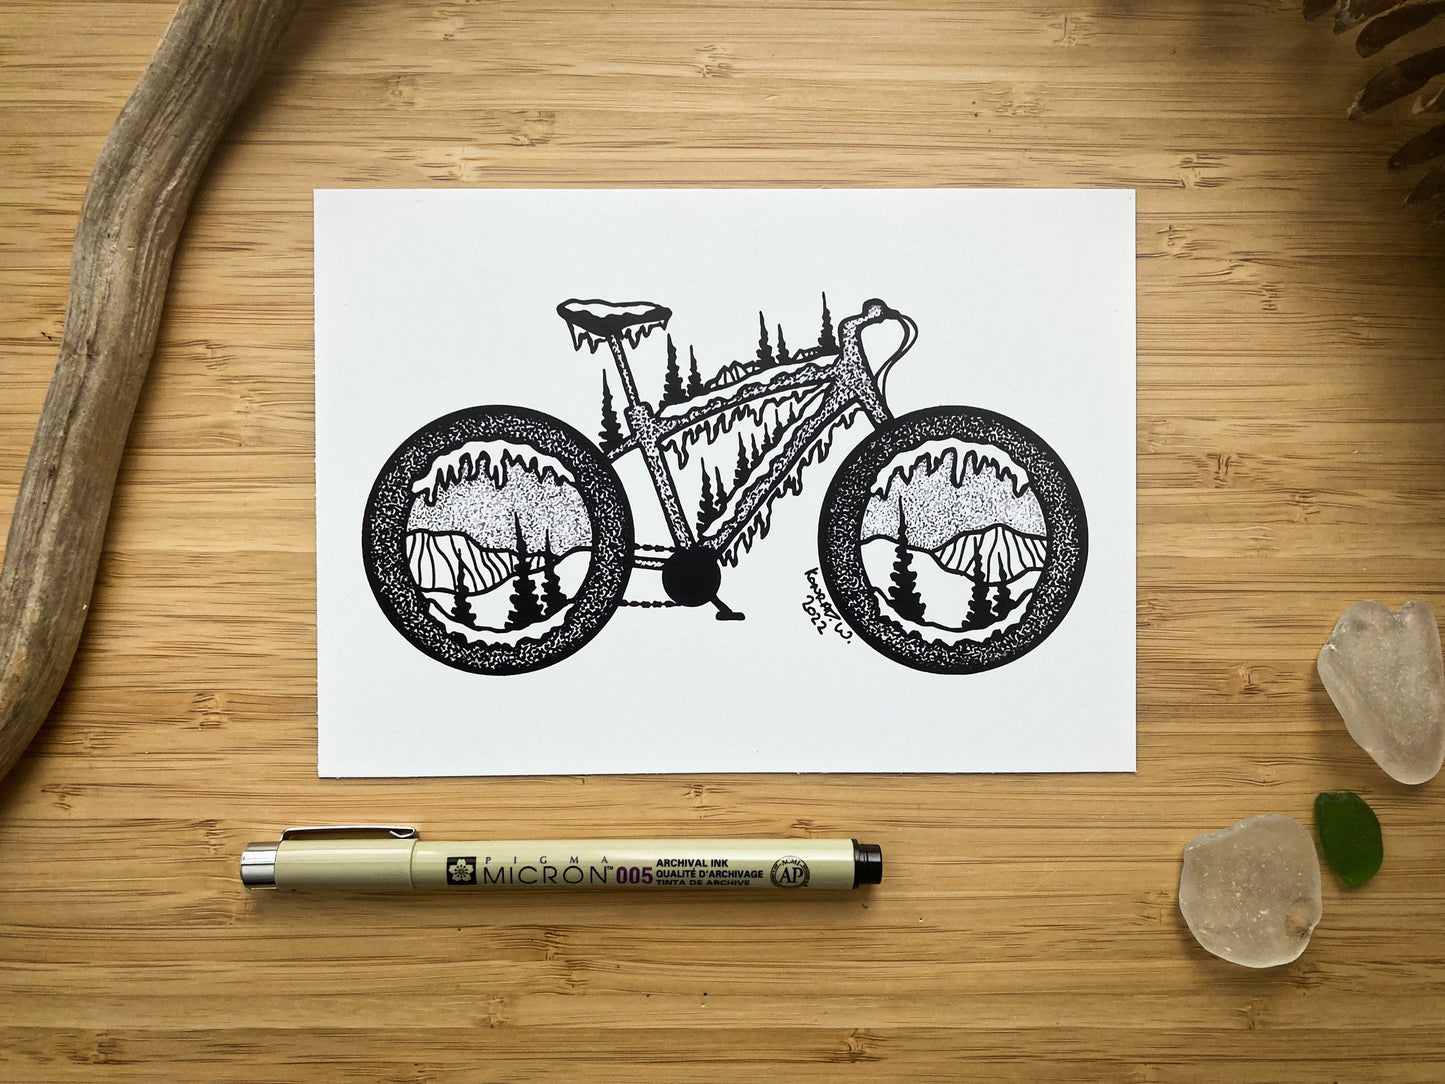 Fat Tire Bike - Pen and Ink PRINT